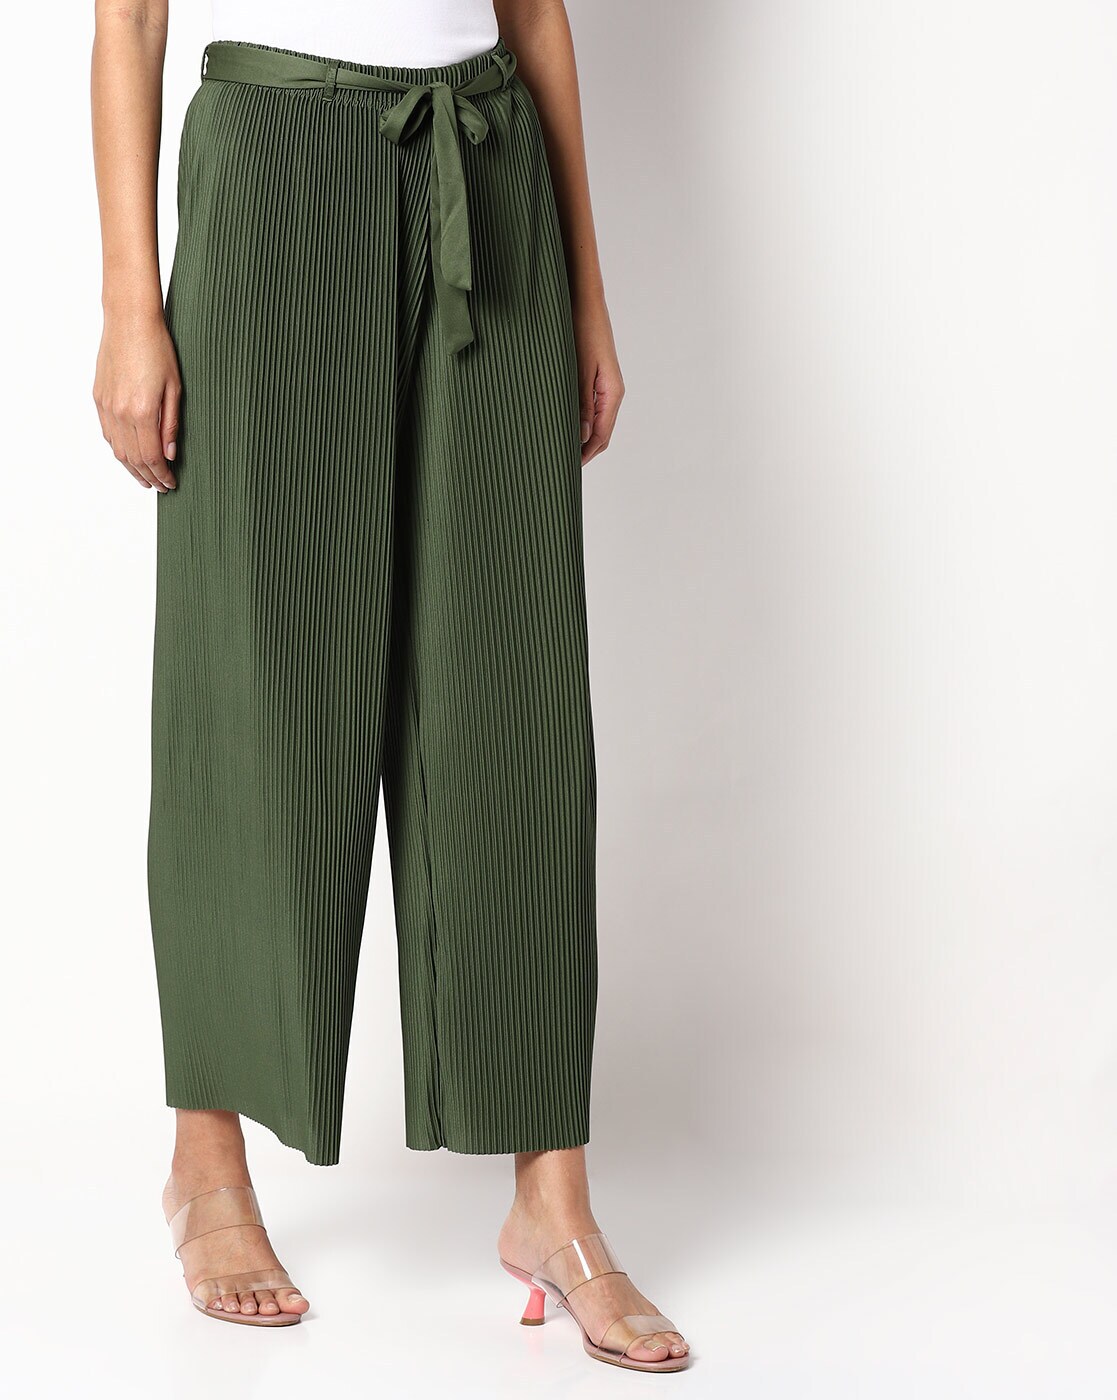 Buy Off-White Pants for Women by Rangmanch by Pantaloons Online | Ajio.com